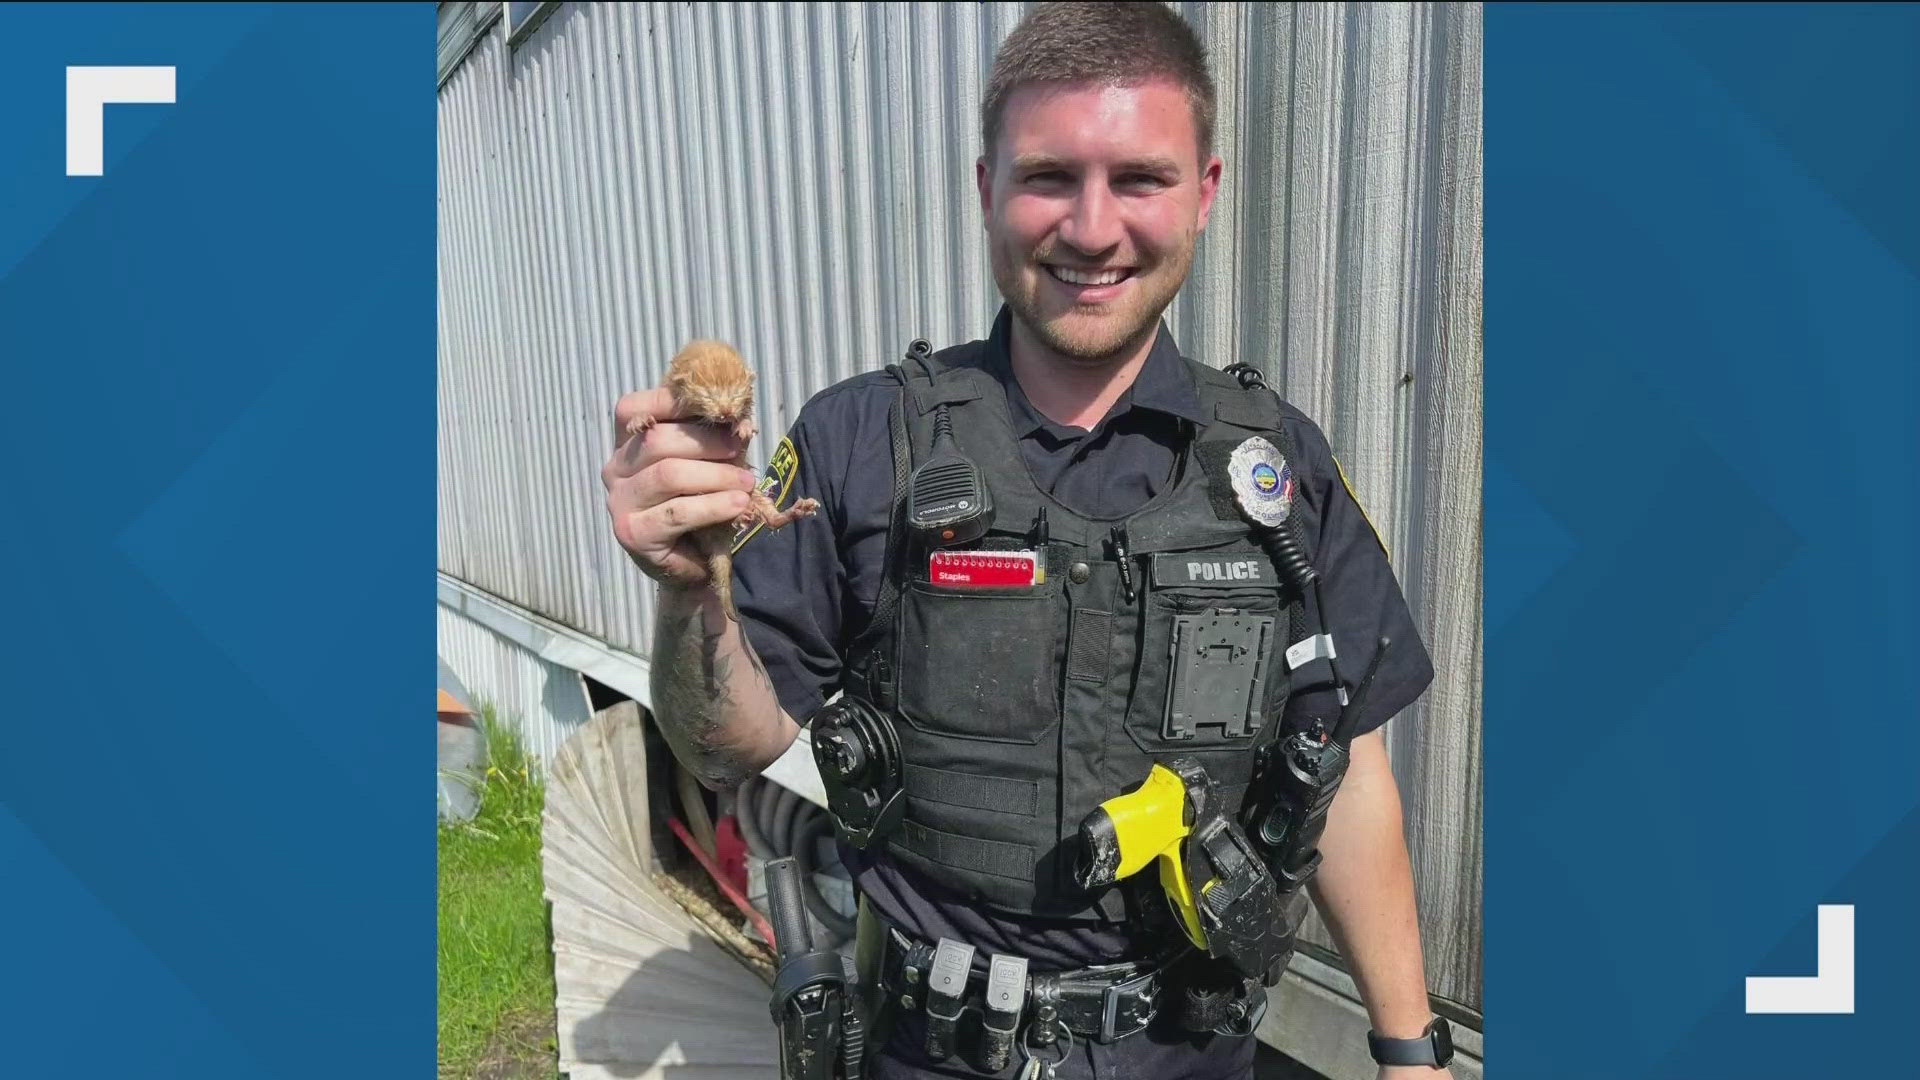 Officer Johnson was beaming with pride after rescuing the tiny kitten from under a mobile home on Sunday.